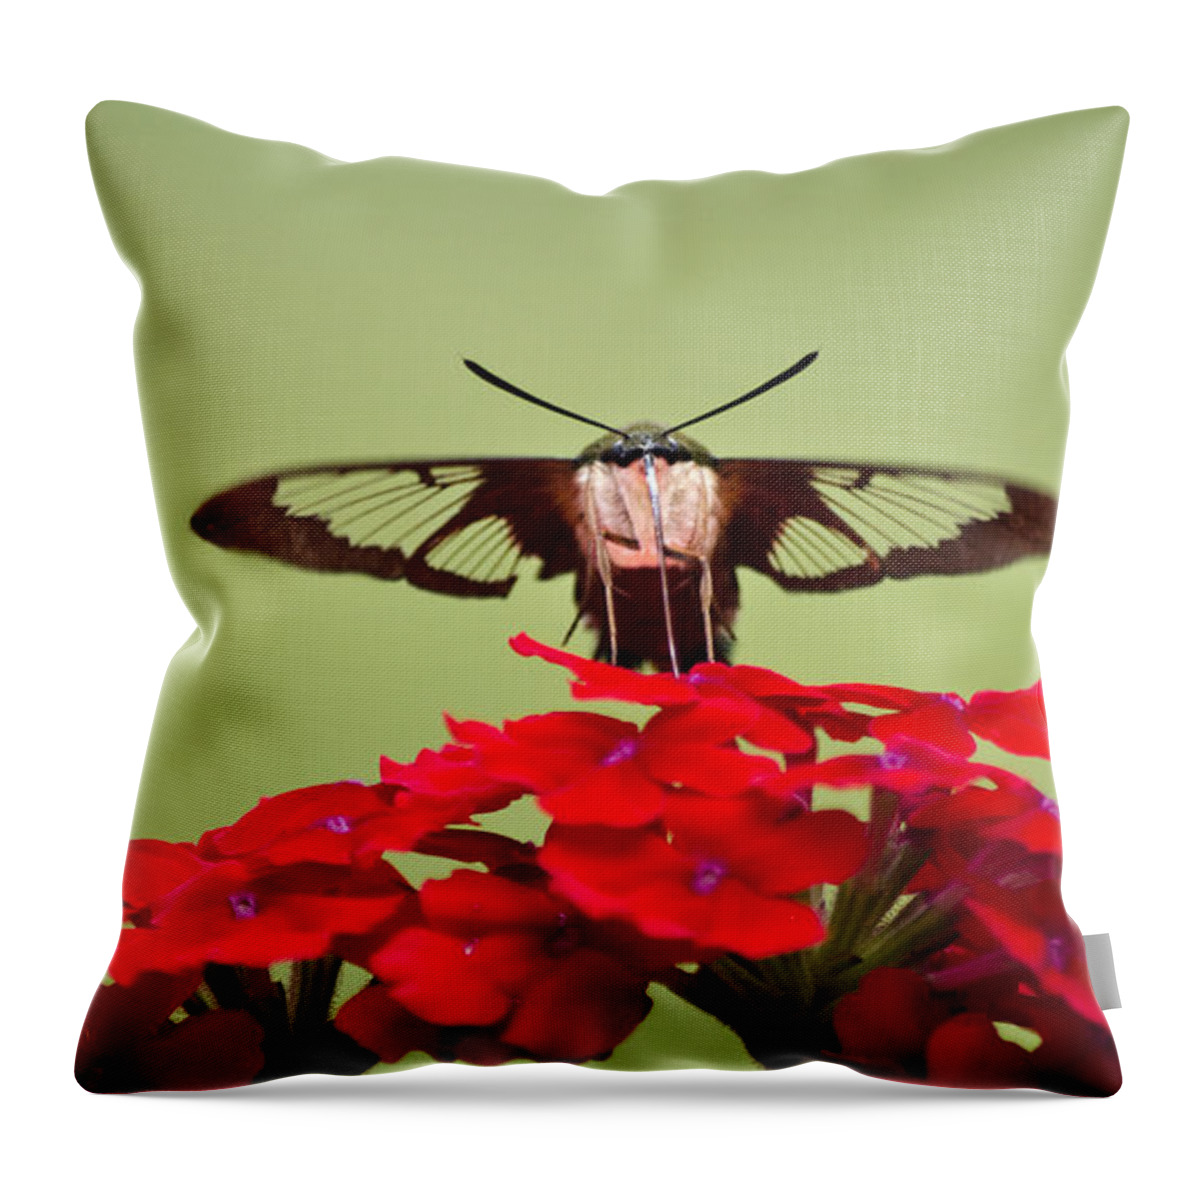 Hummingbird Clearwing Moth Throw Pillow featuring the photograph Hummingbird Clearwing Moth Front And Center by Christina Rollo